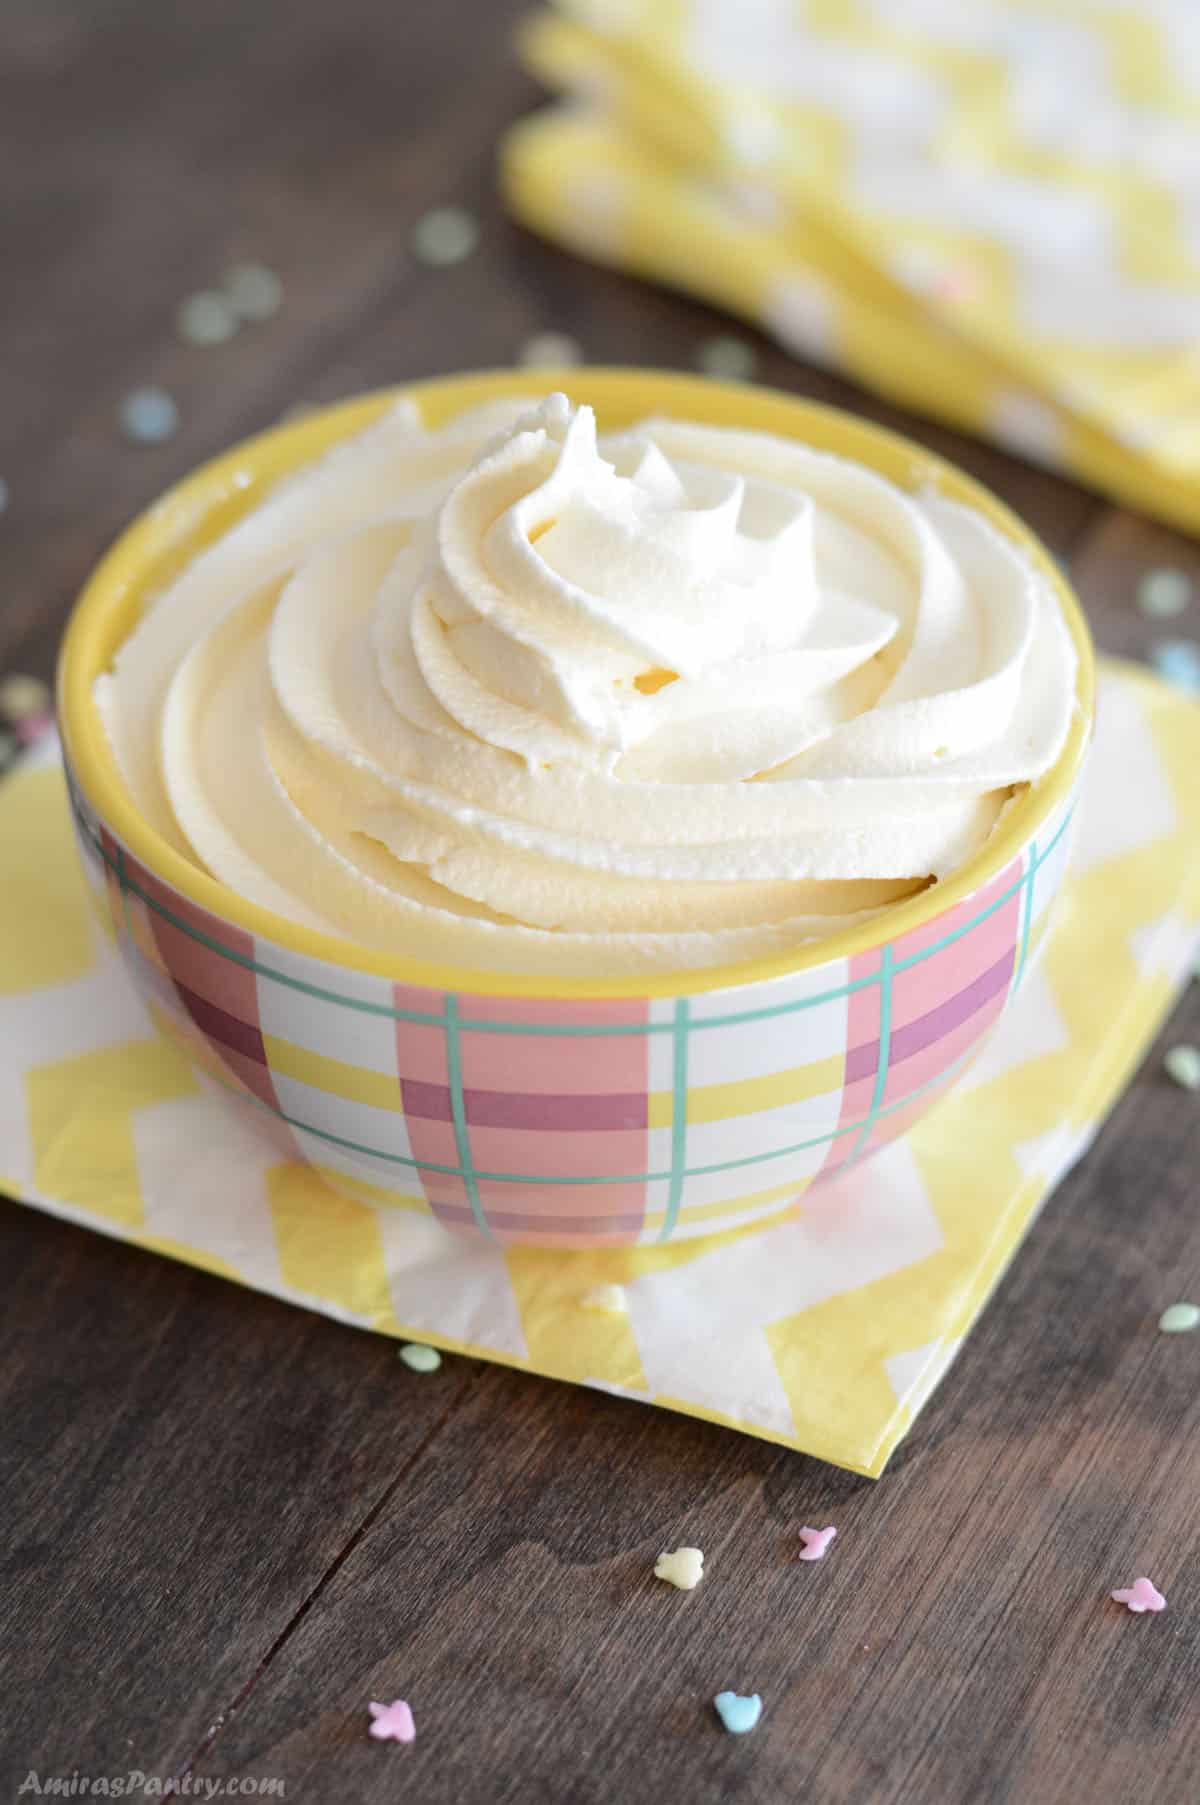 Marshmallow frosting in a pink bowl.